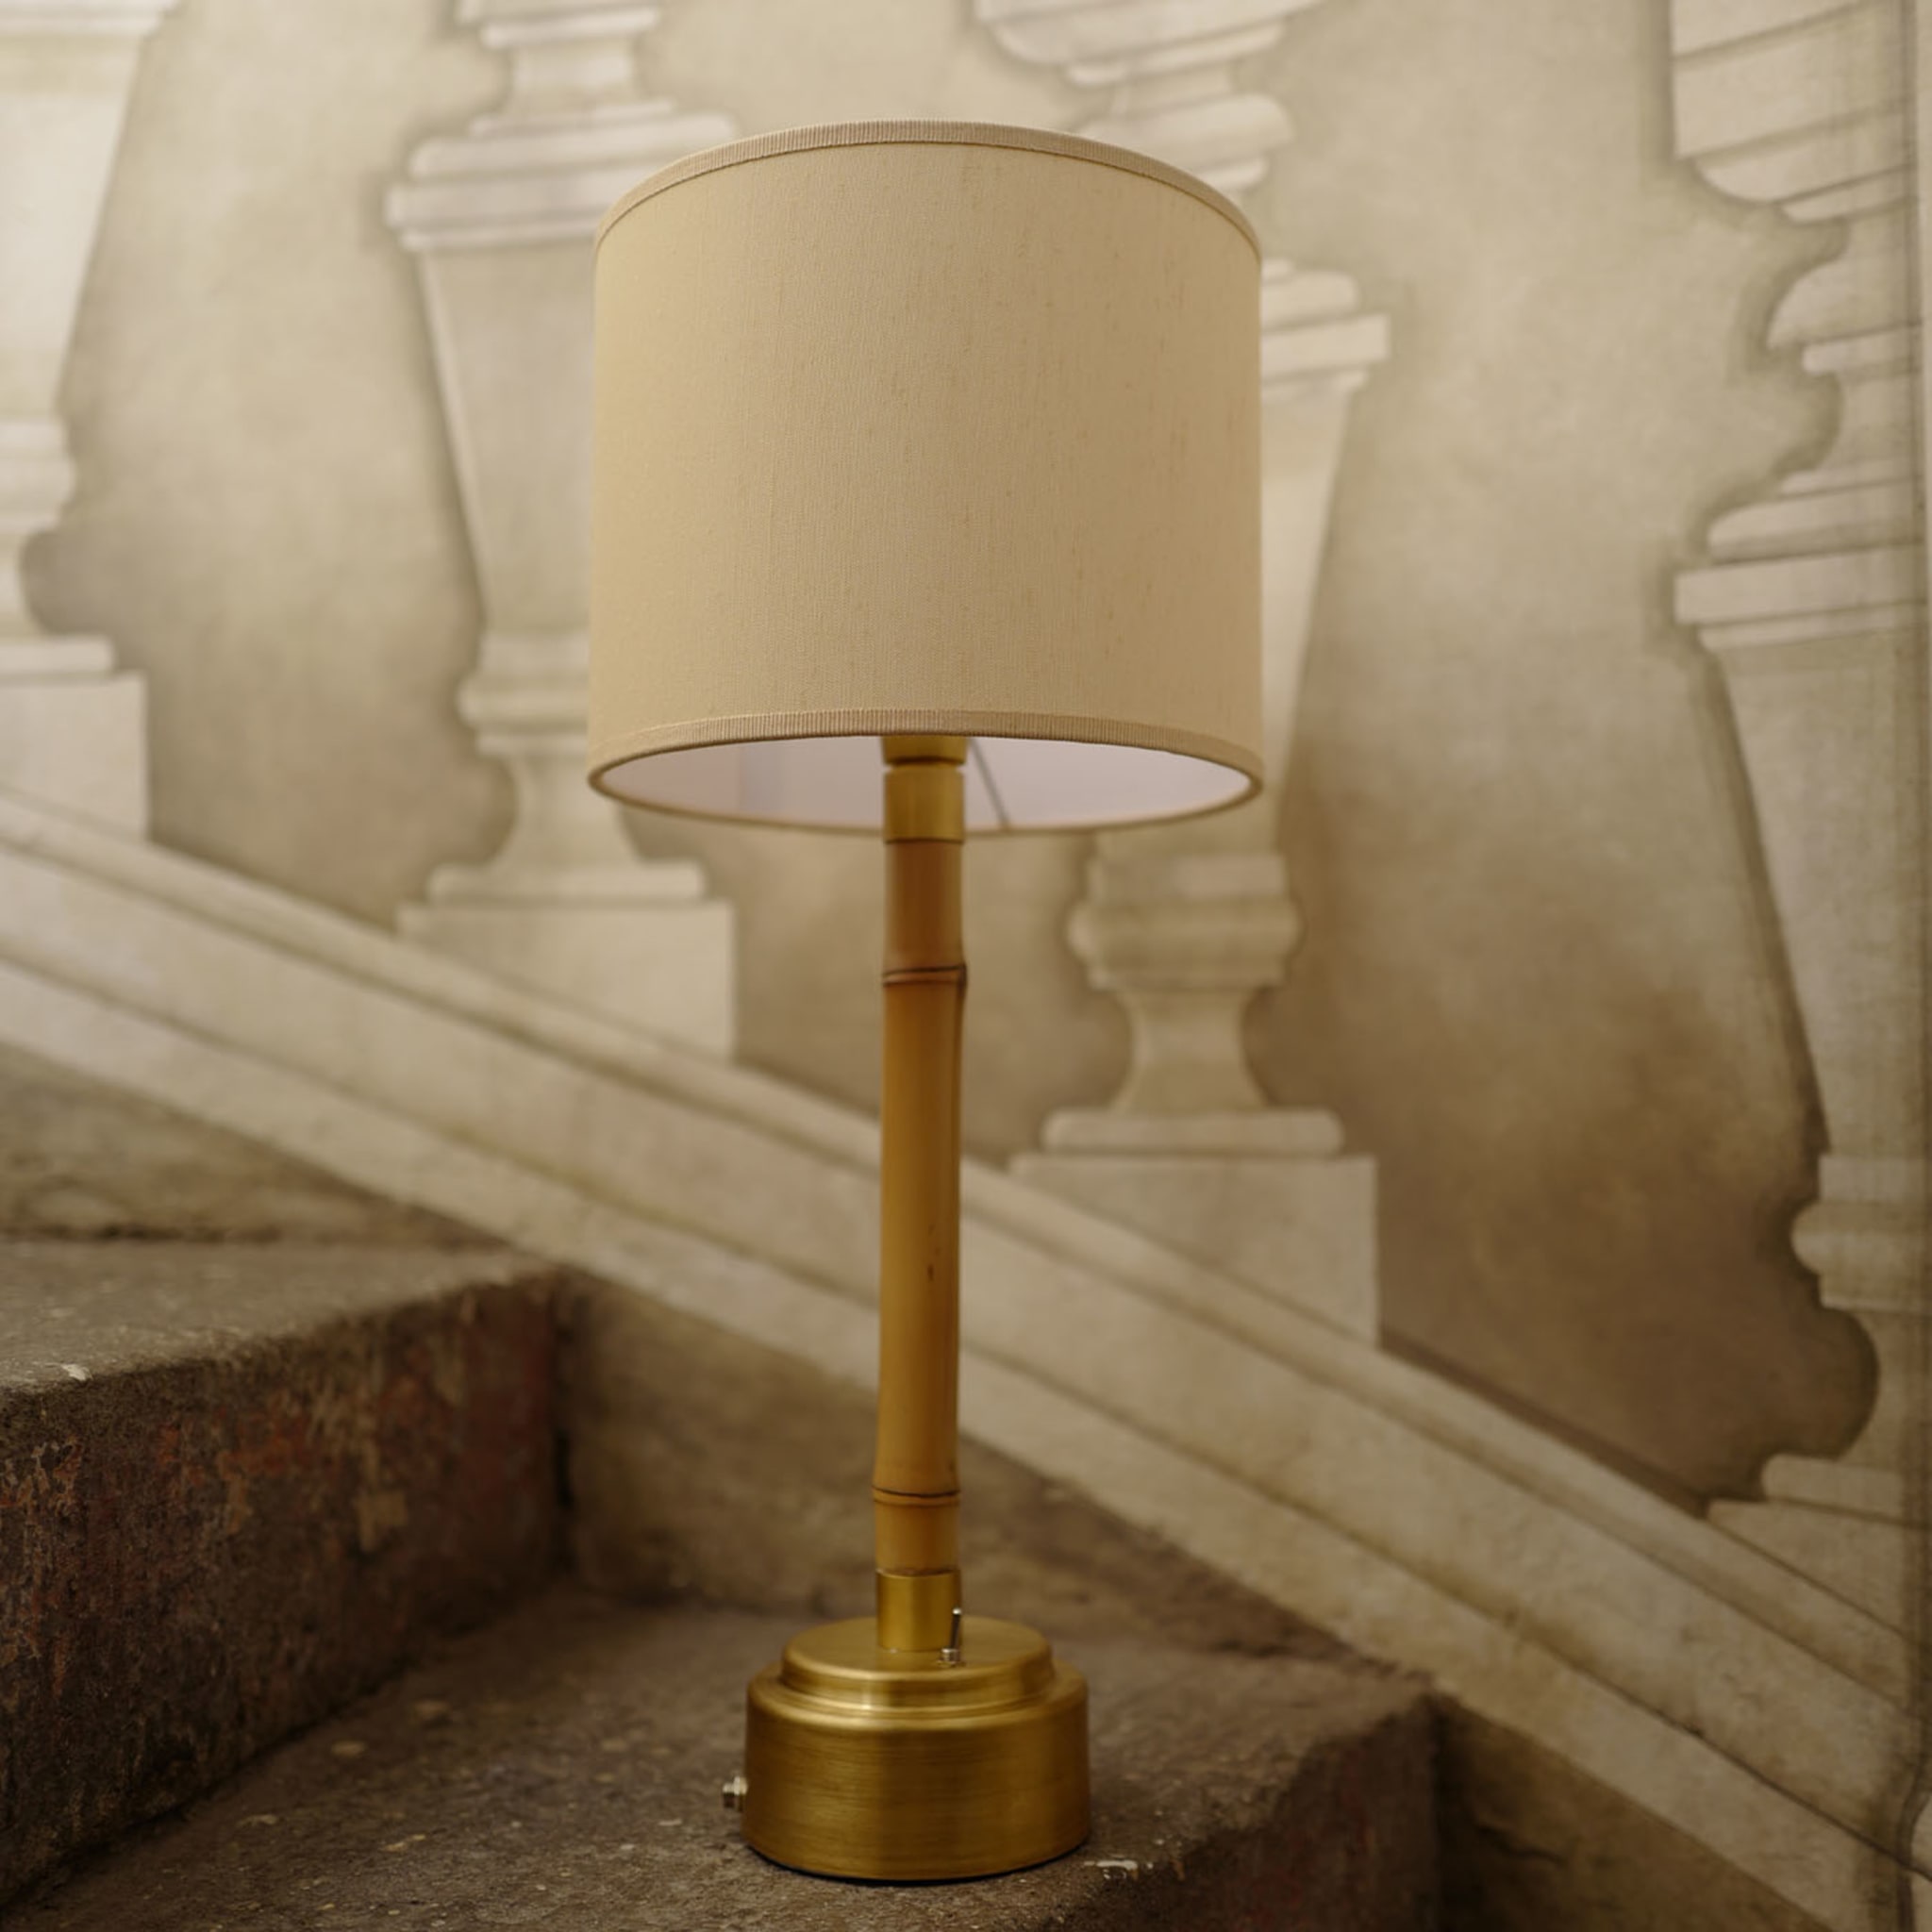 Funghetto Ivory Bamboo Wireless Table Lamp - Alternative view 1